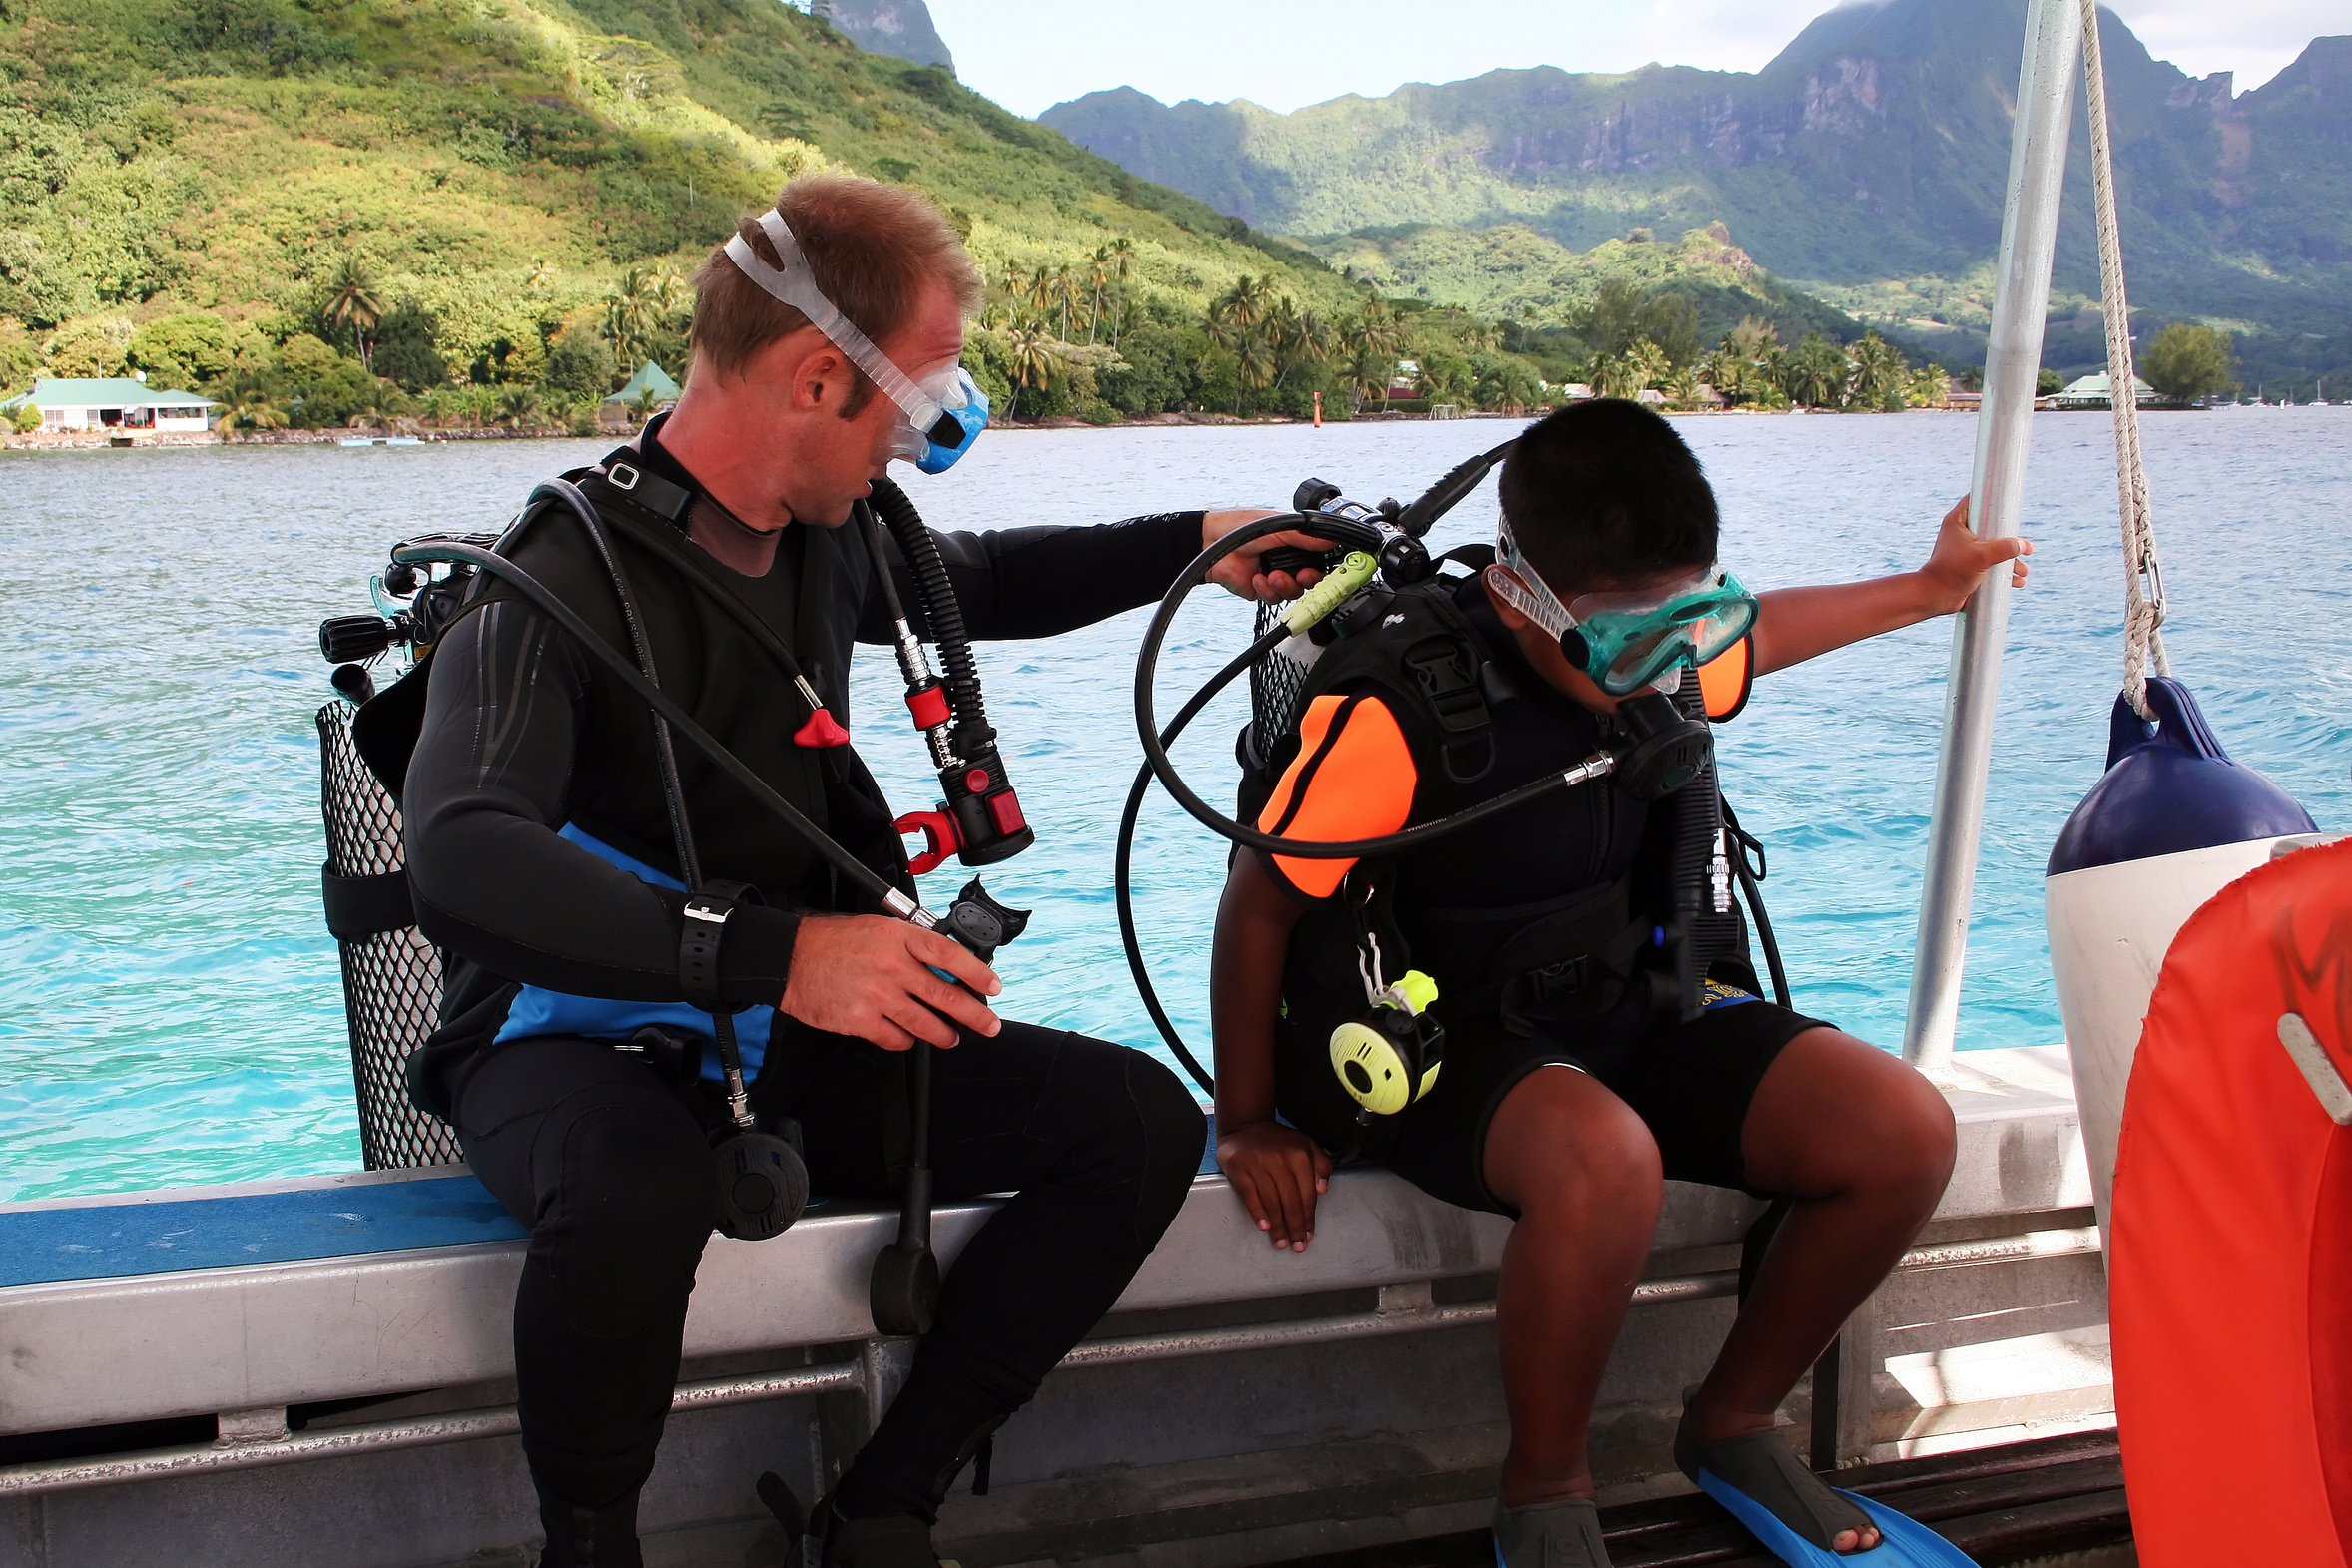 Two scuba divers become dive buddies and perform their pre-dive buddy check on the dive boat before taking a giant stride into the big blue ocean